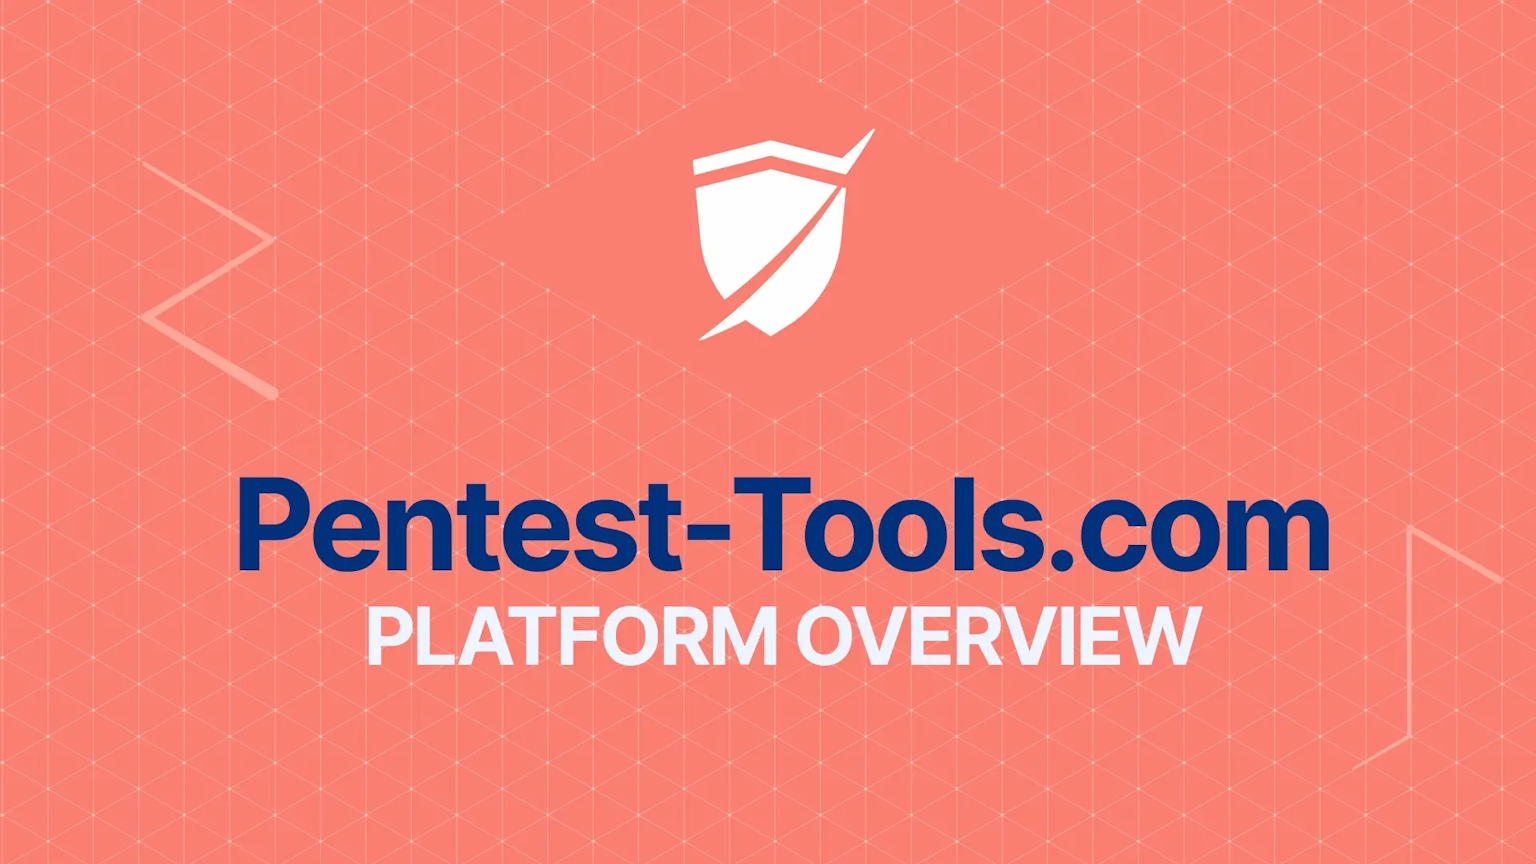 Pentest-Tools.com - Platform Overview 🛡 Offensive security tools & features at a glance